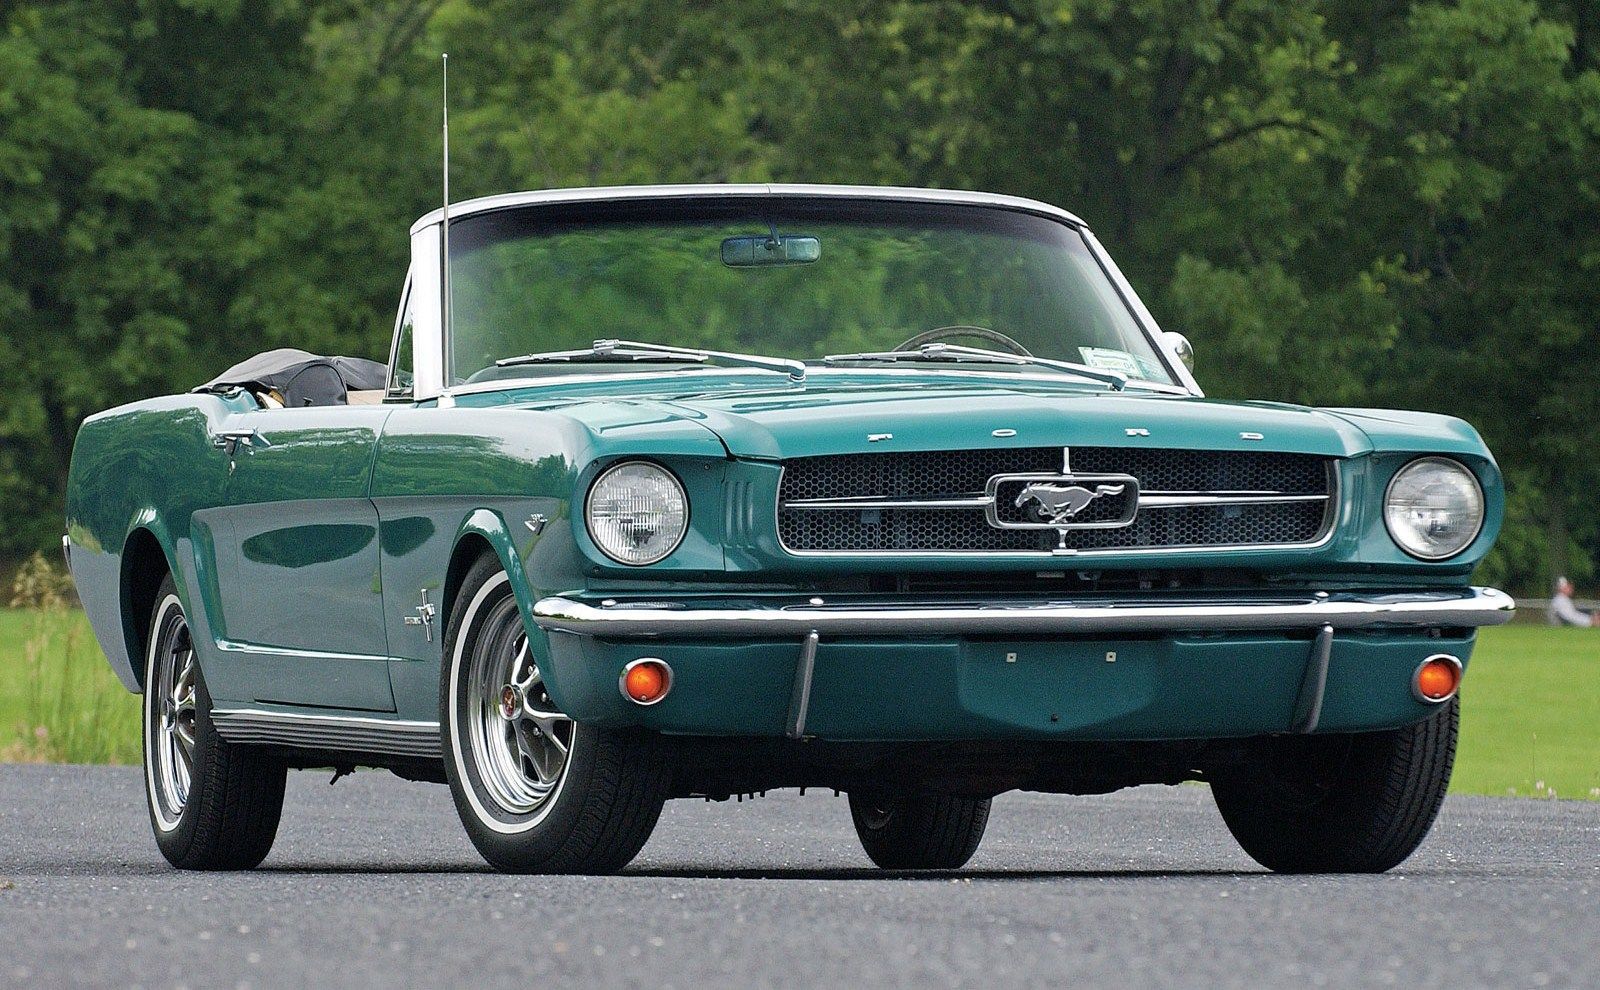 green Mustang in forest